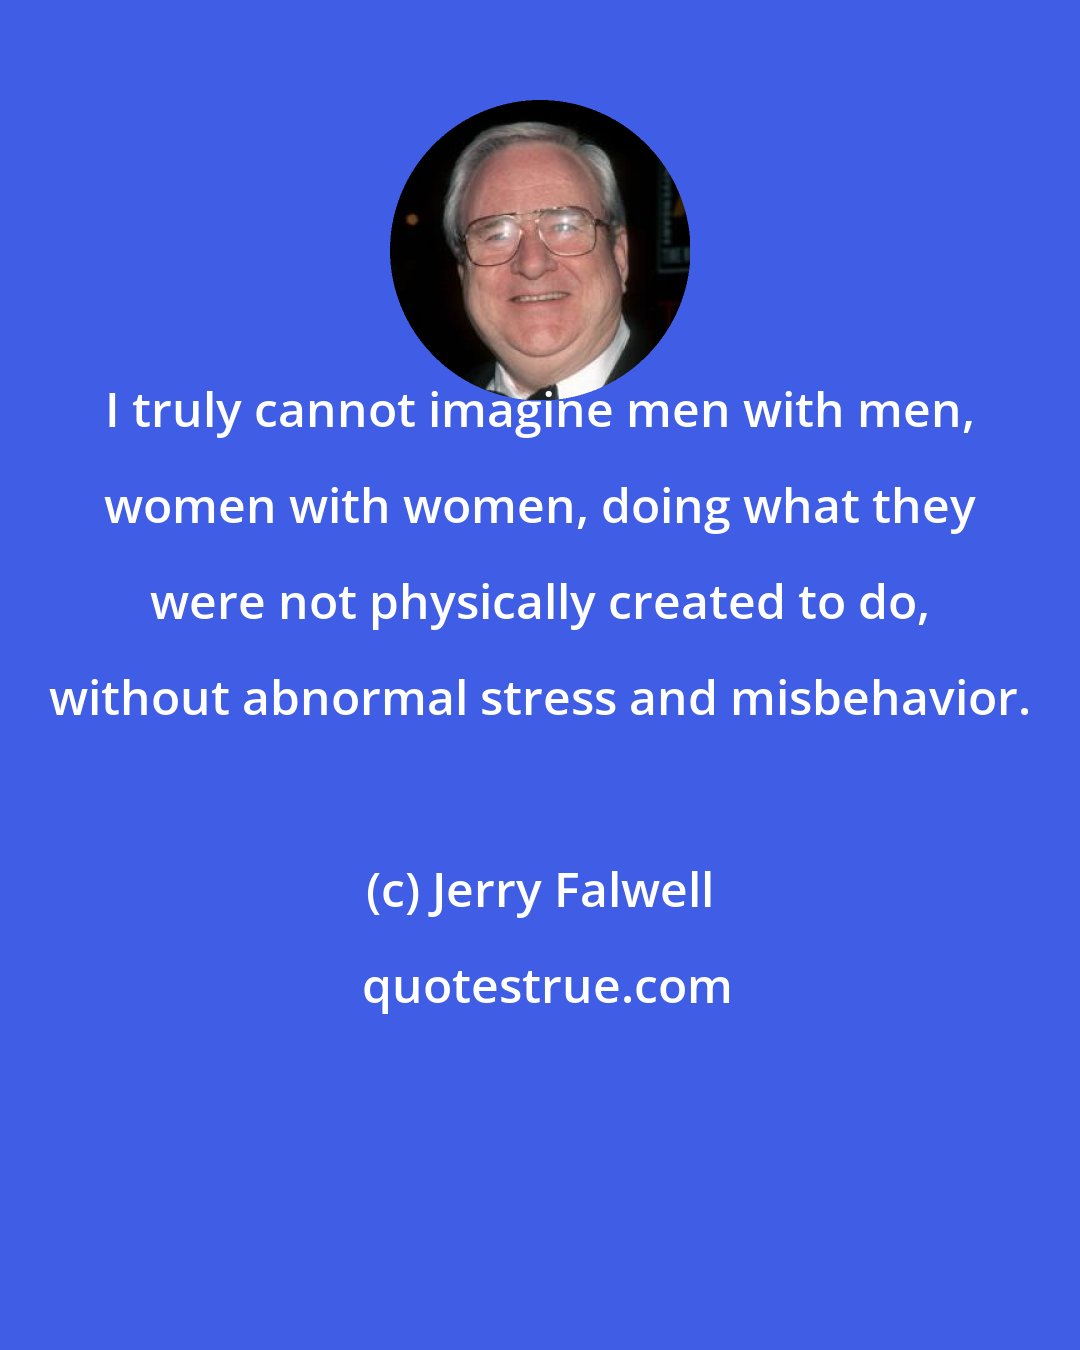 Jerry Falwell: I truly cannot imagine men with men, women with women, doing what they were not physically created to do, without abnormal stress and misbehavior.